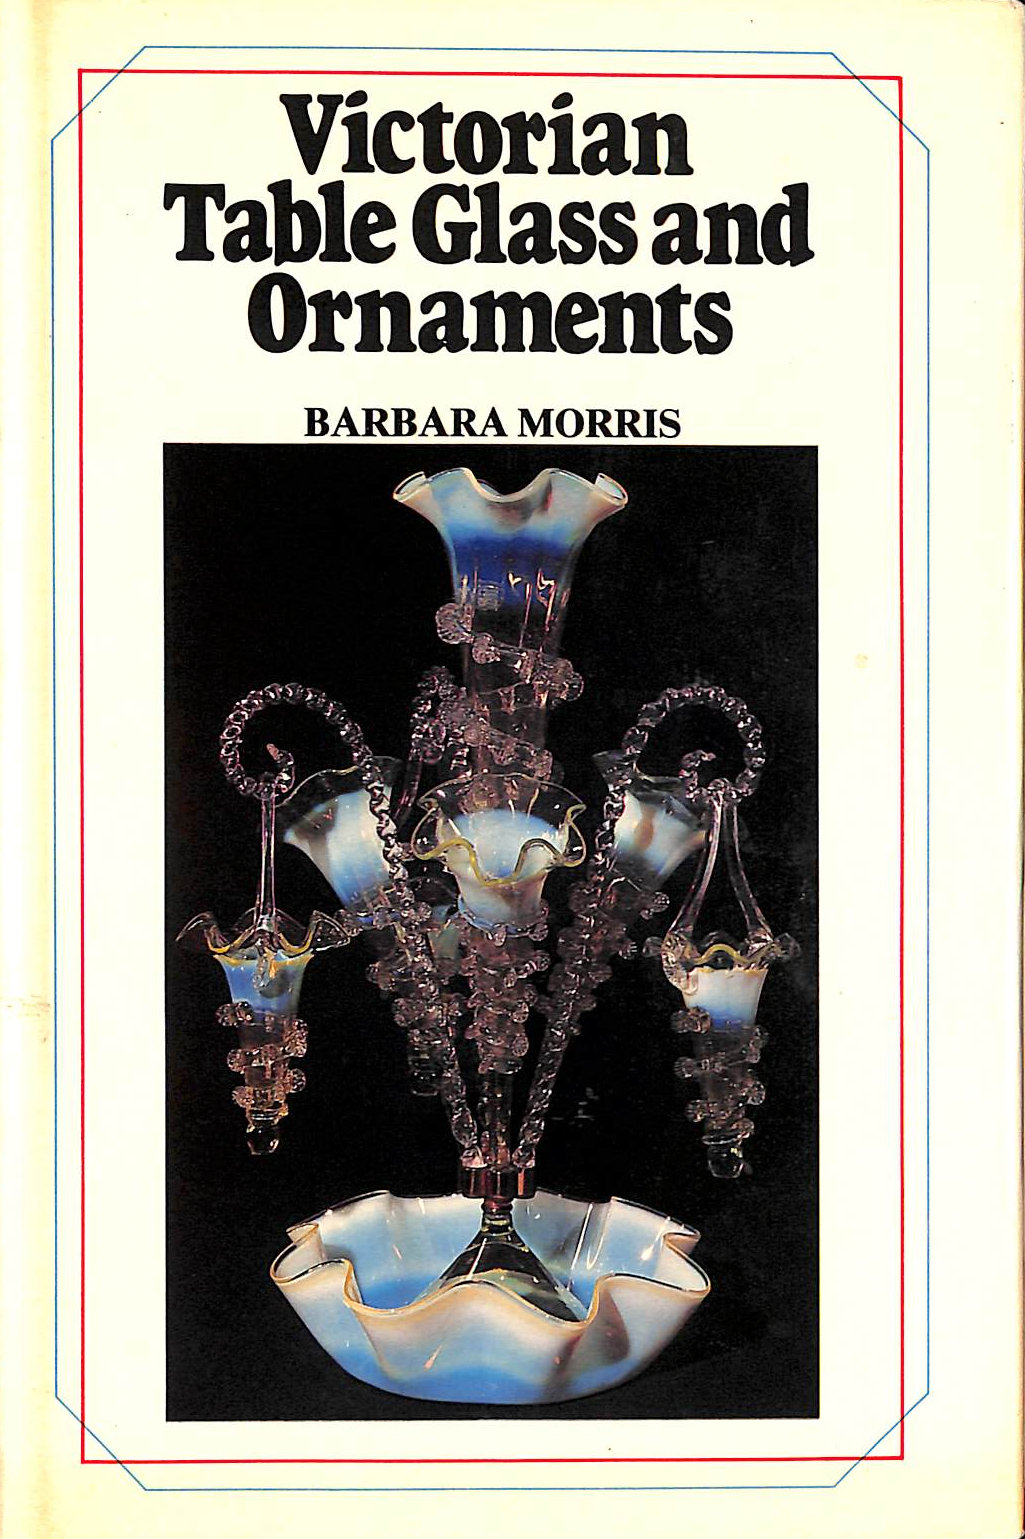 B MORRIS - Victorian Table Glass and Ornaments - Signed by the author.